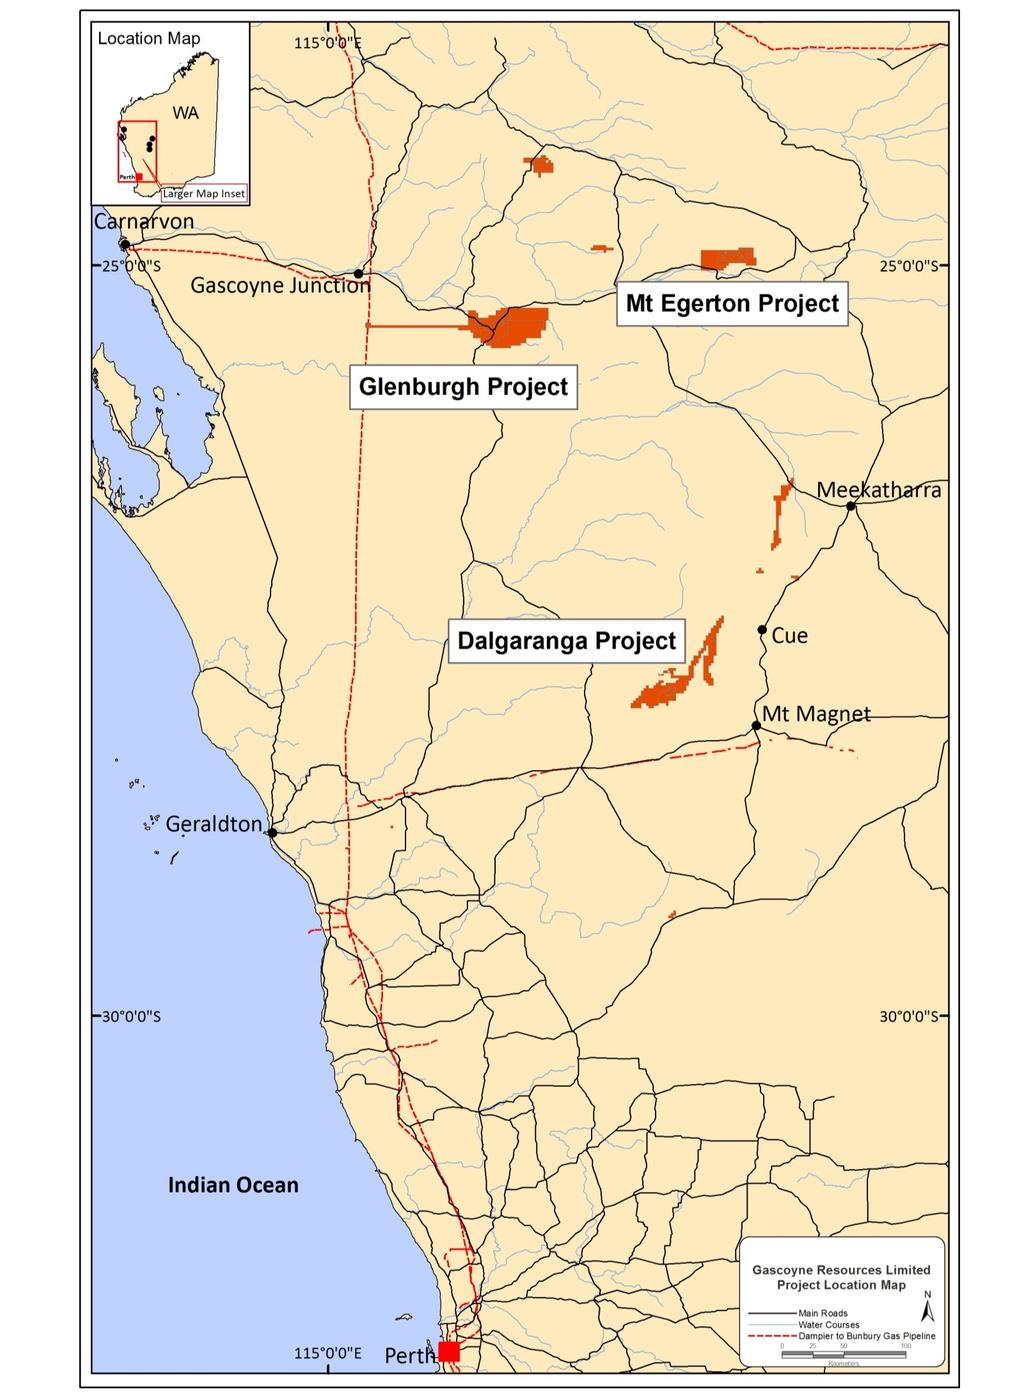 Figure One: Gascoyne Resources Project